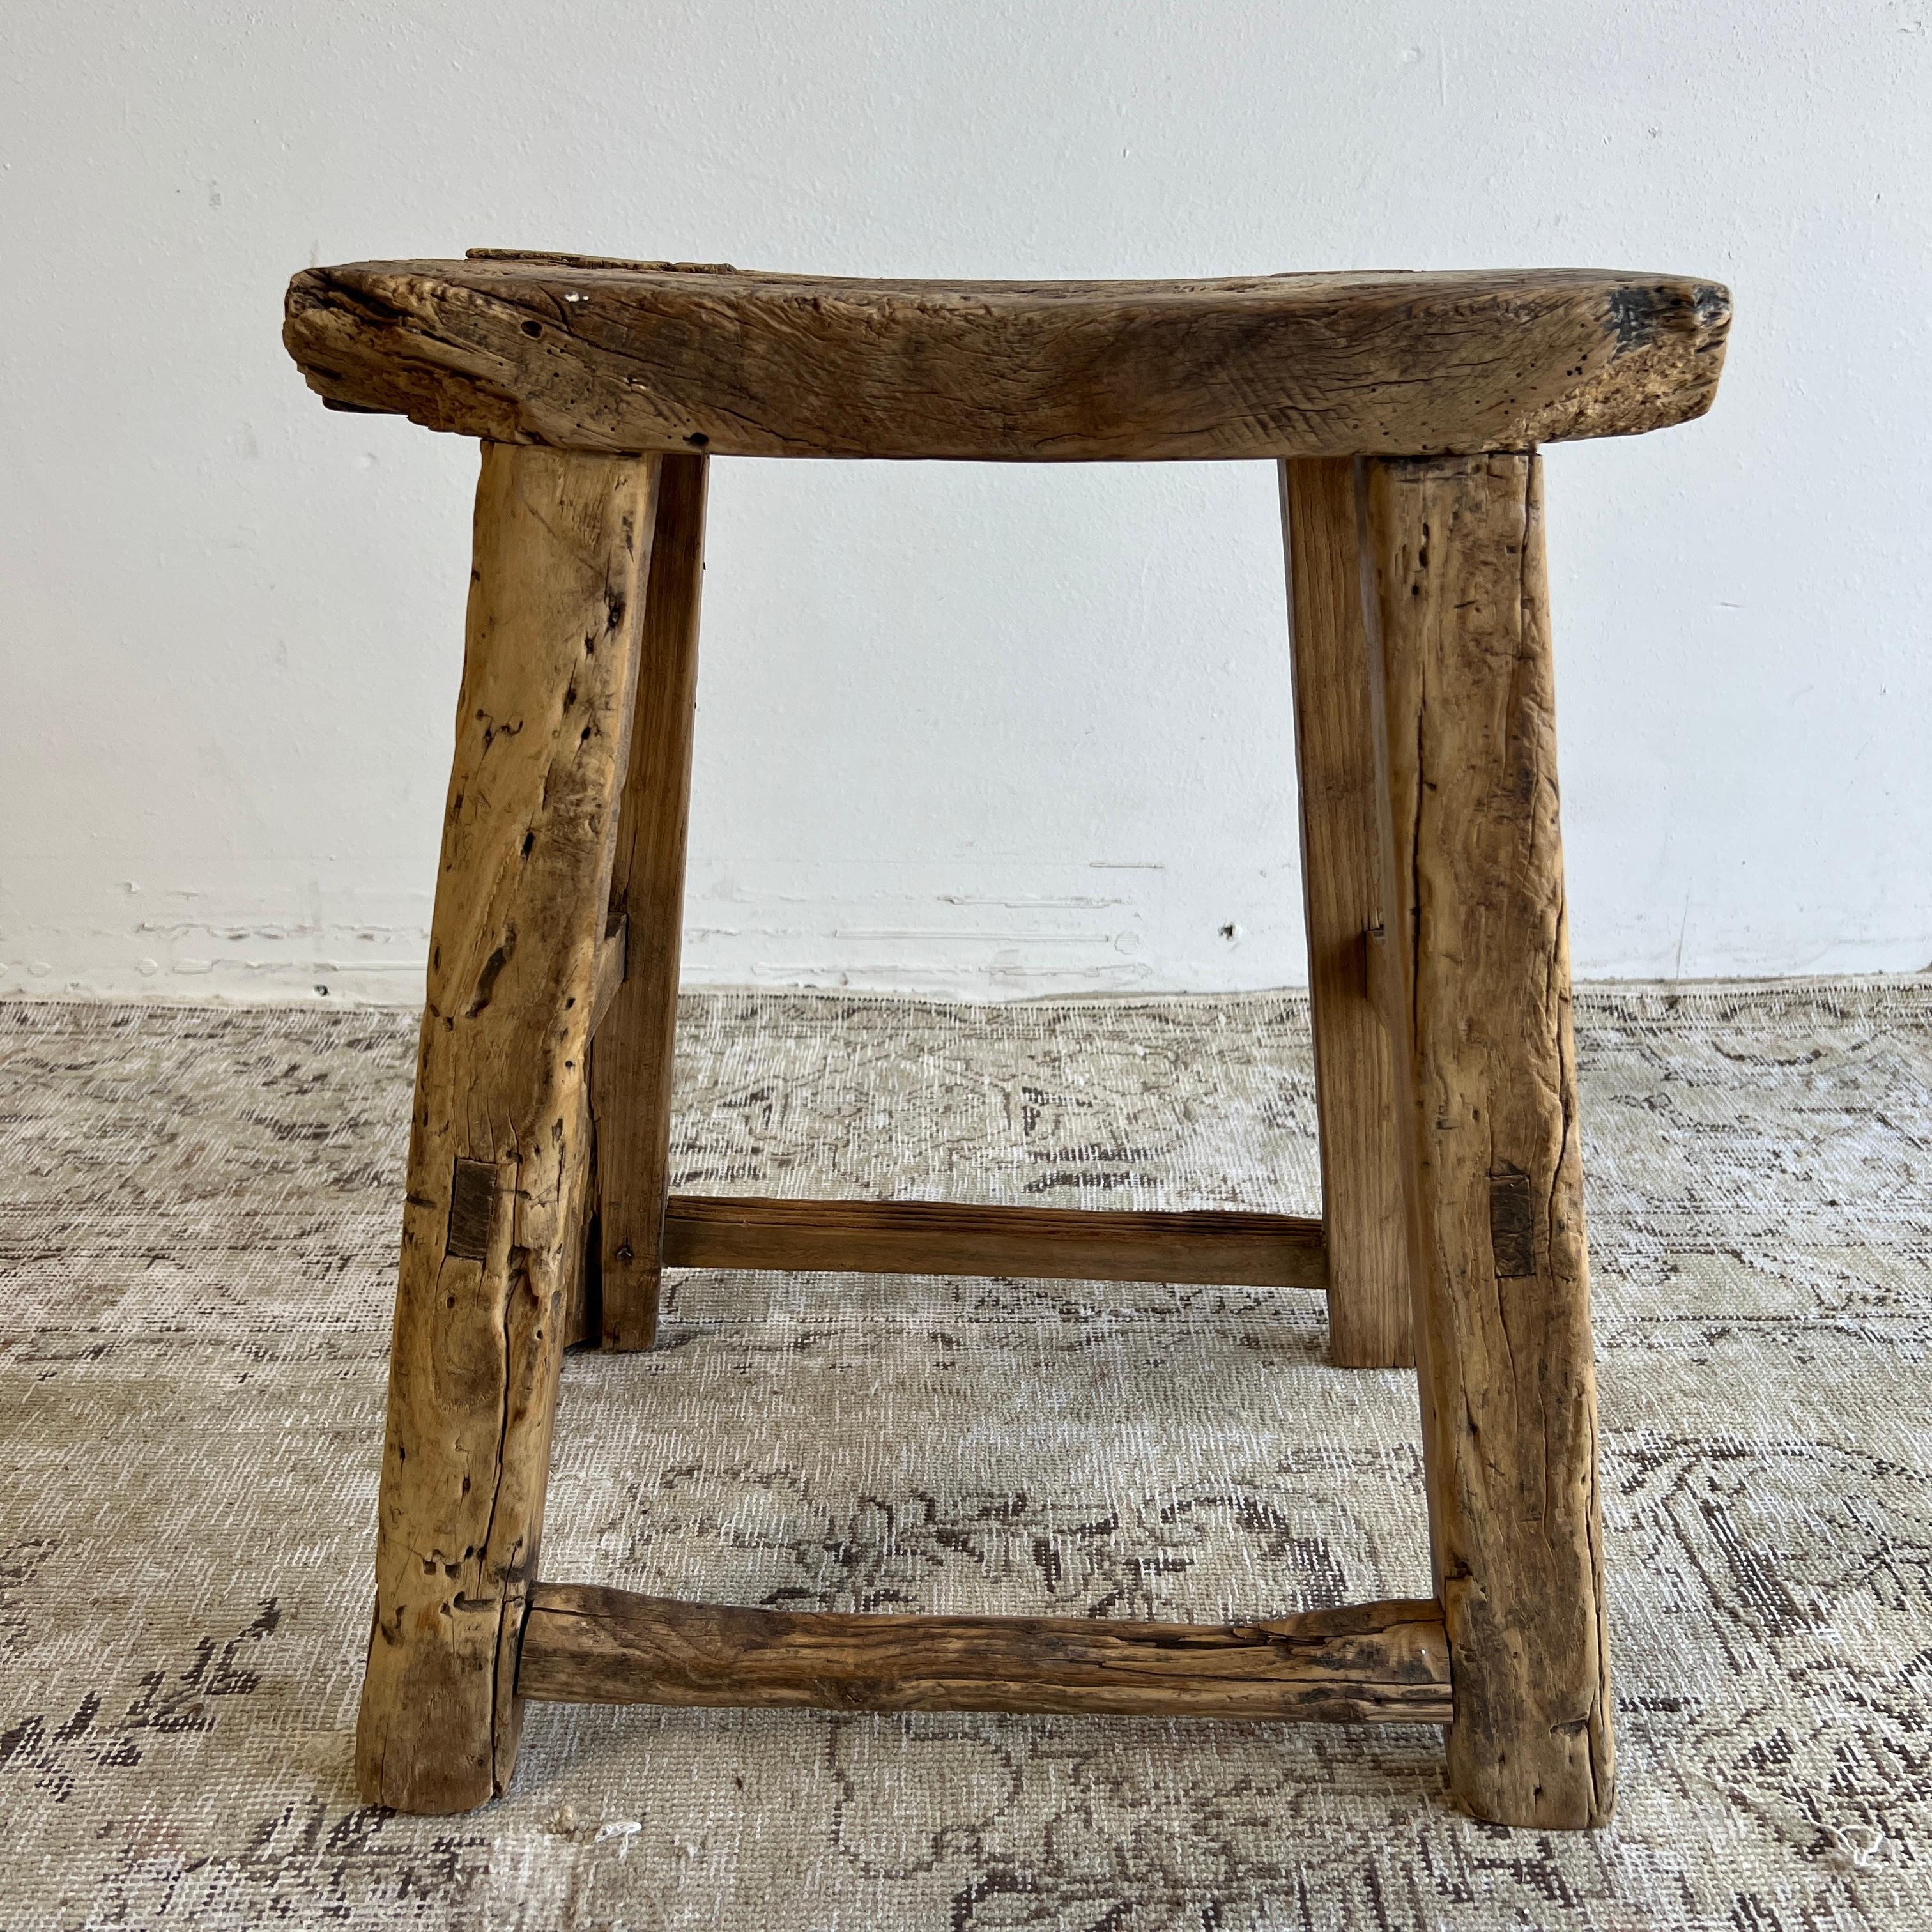 Vintage antique elm wood stool These are the real vintage antique elm wood stools! Beautiful antique patina, with weathering and age, these are solid and sturdy ready for daily use, use as a table, stool, drink table, they are great for any space.